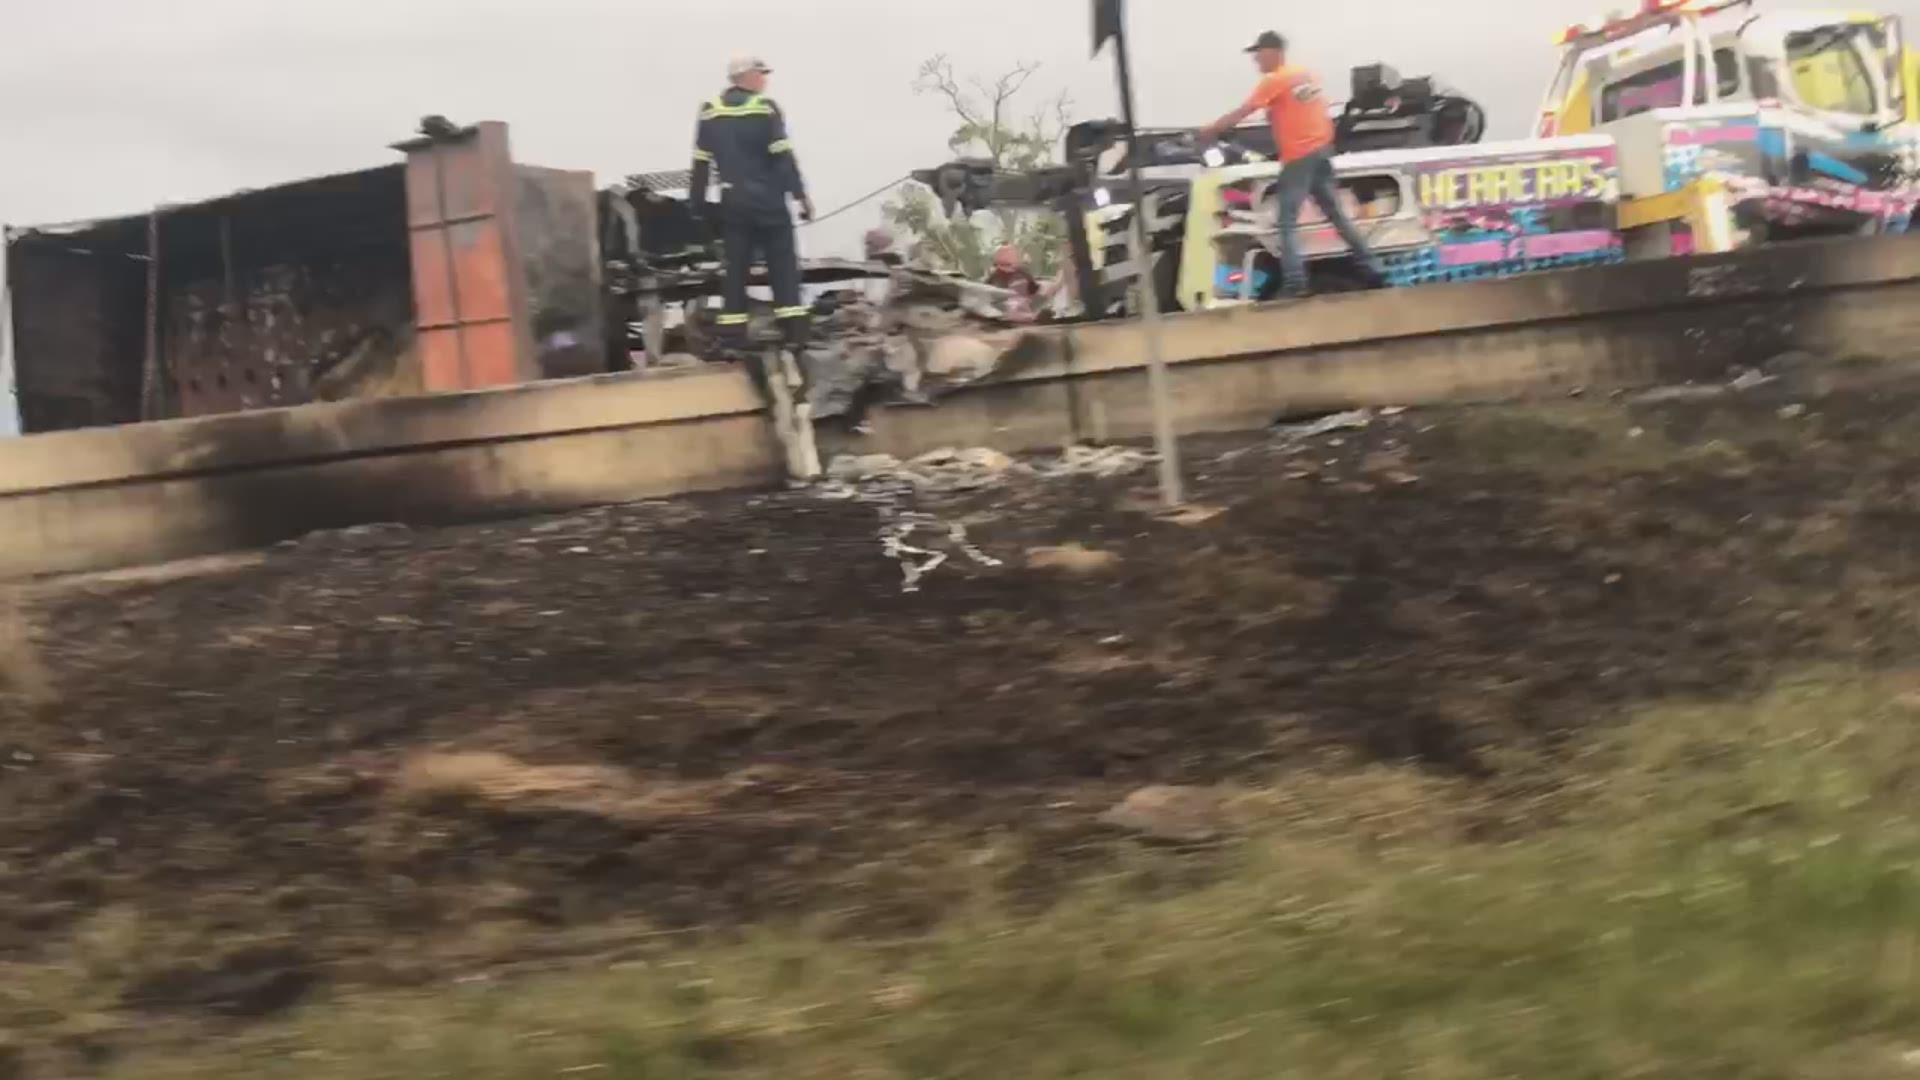 The crash claimed the life of a 58-year-old Houston man.